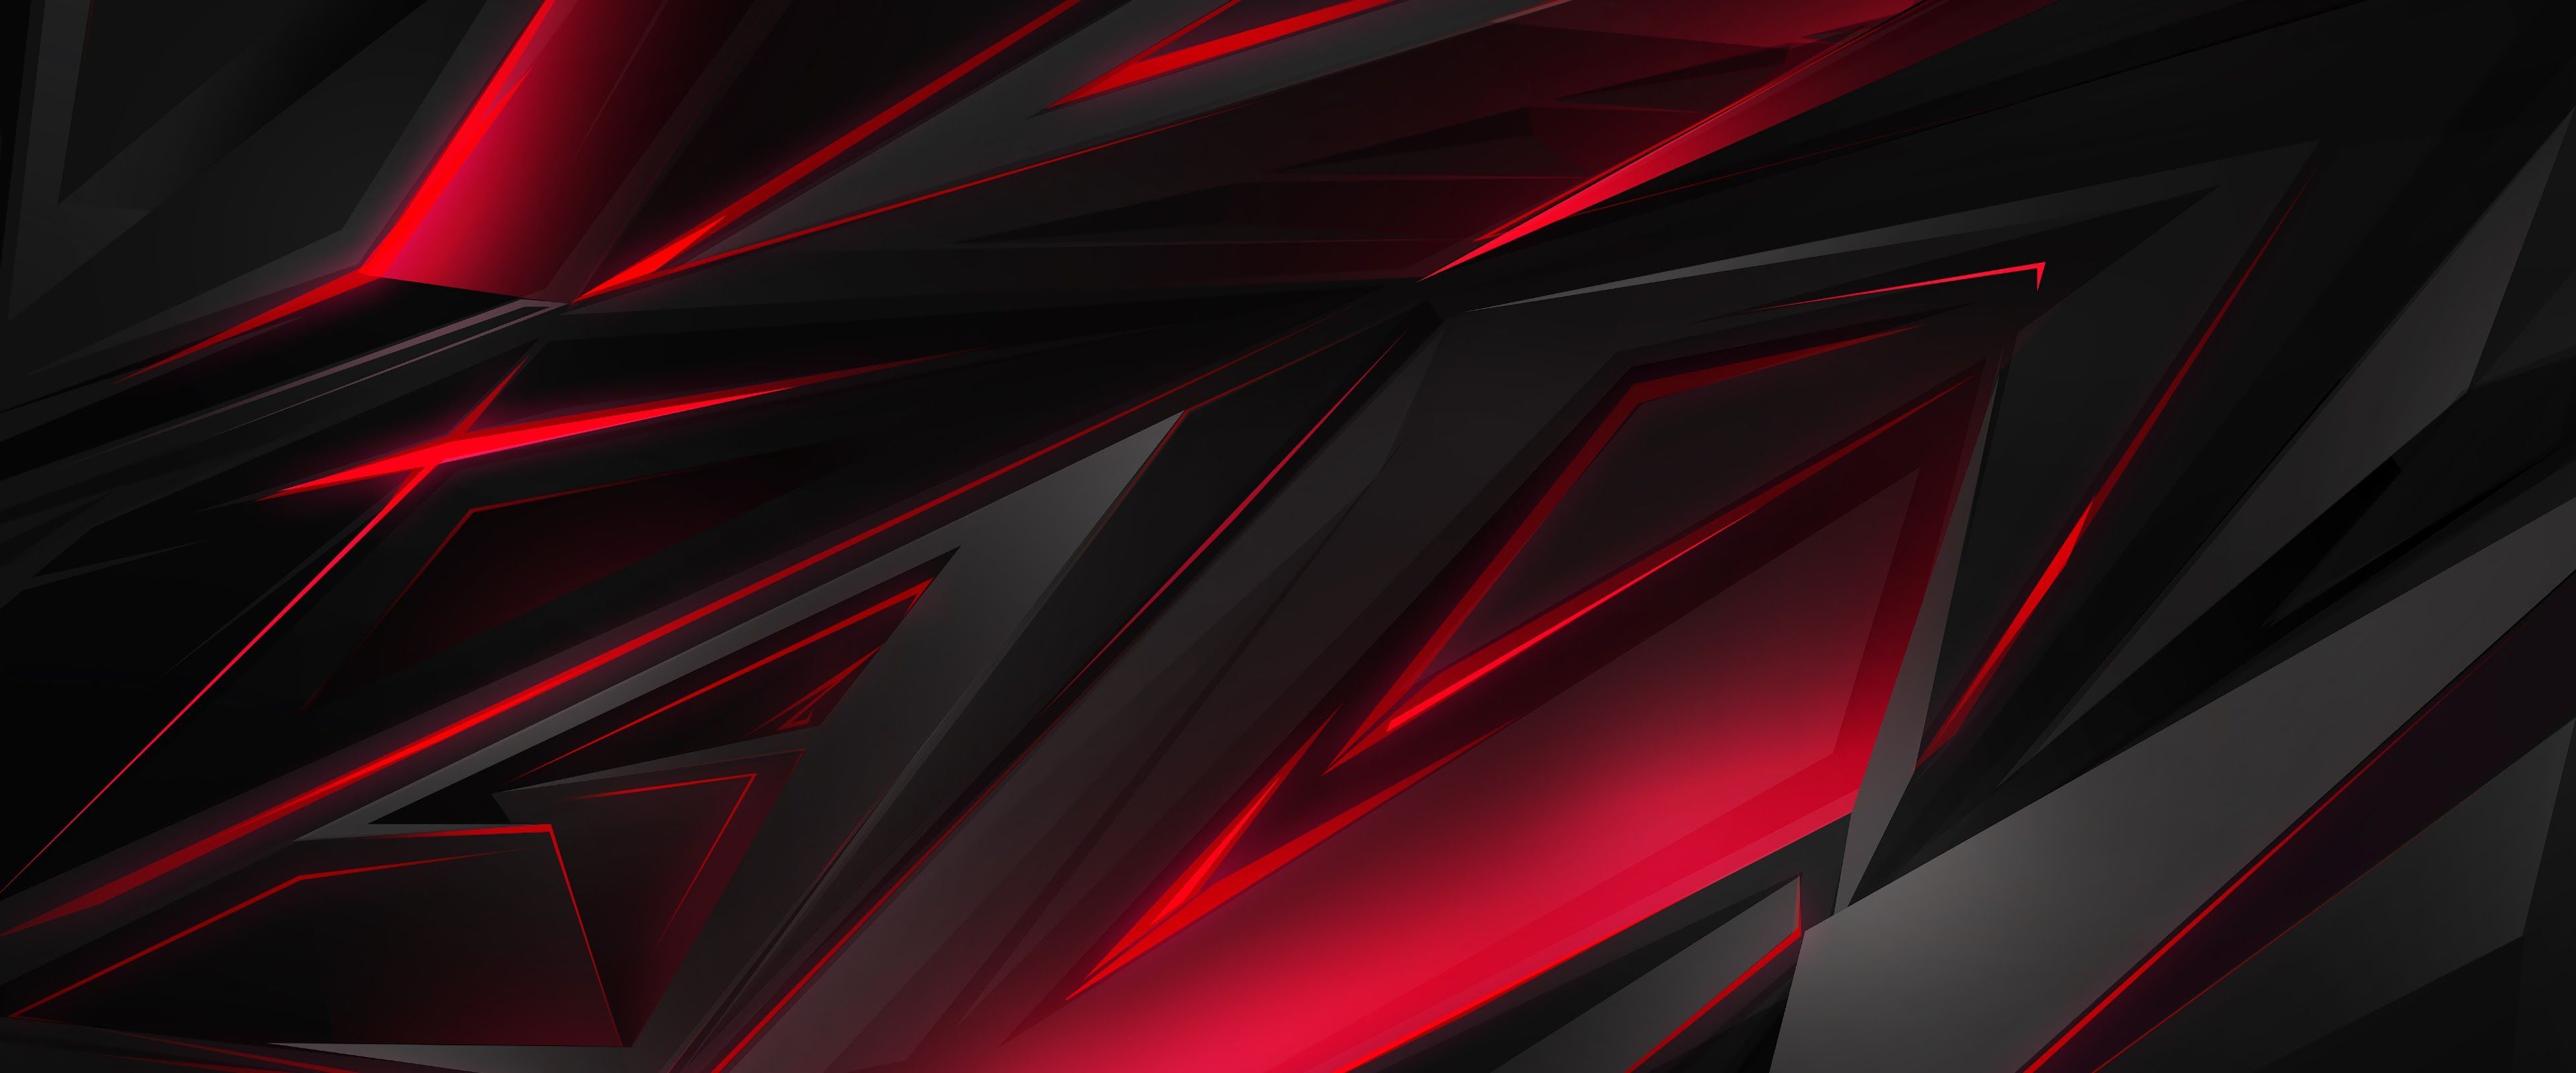  4k Gaming Hintergrundbild 3840x1600. 4K Gaming Red and Black Abstract Wallpaper Free 4K Gaming Red and Black Abstract Background